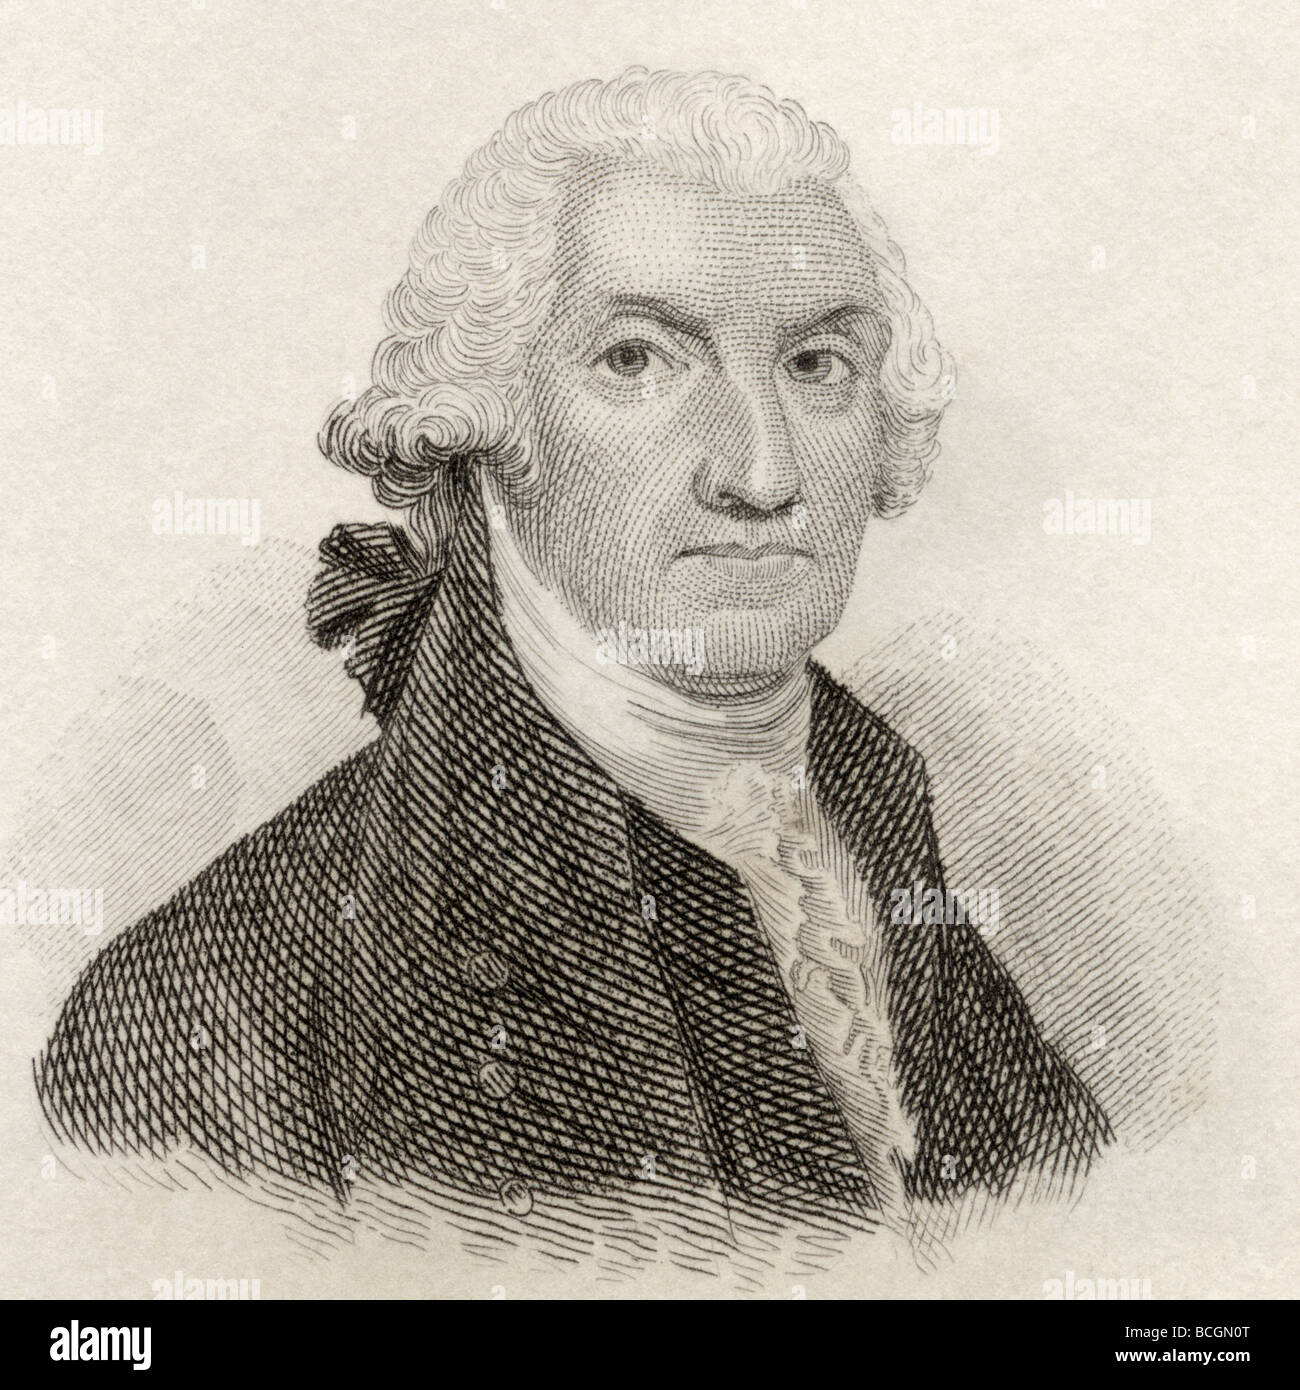 George Washington 1732 to 1799.   First President of the United States. Stock Photo